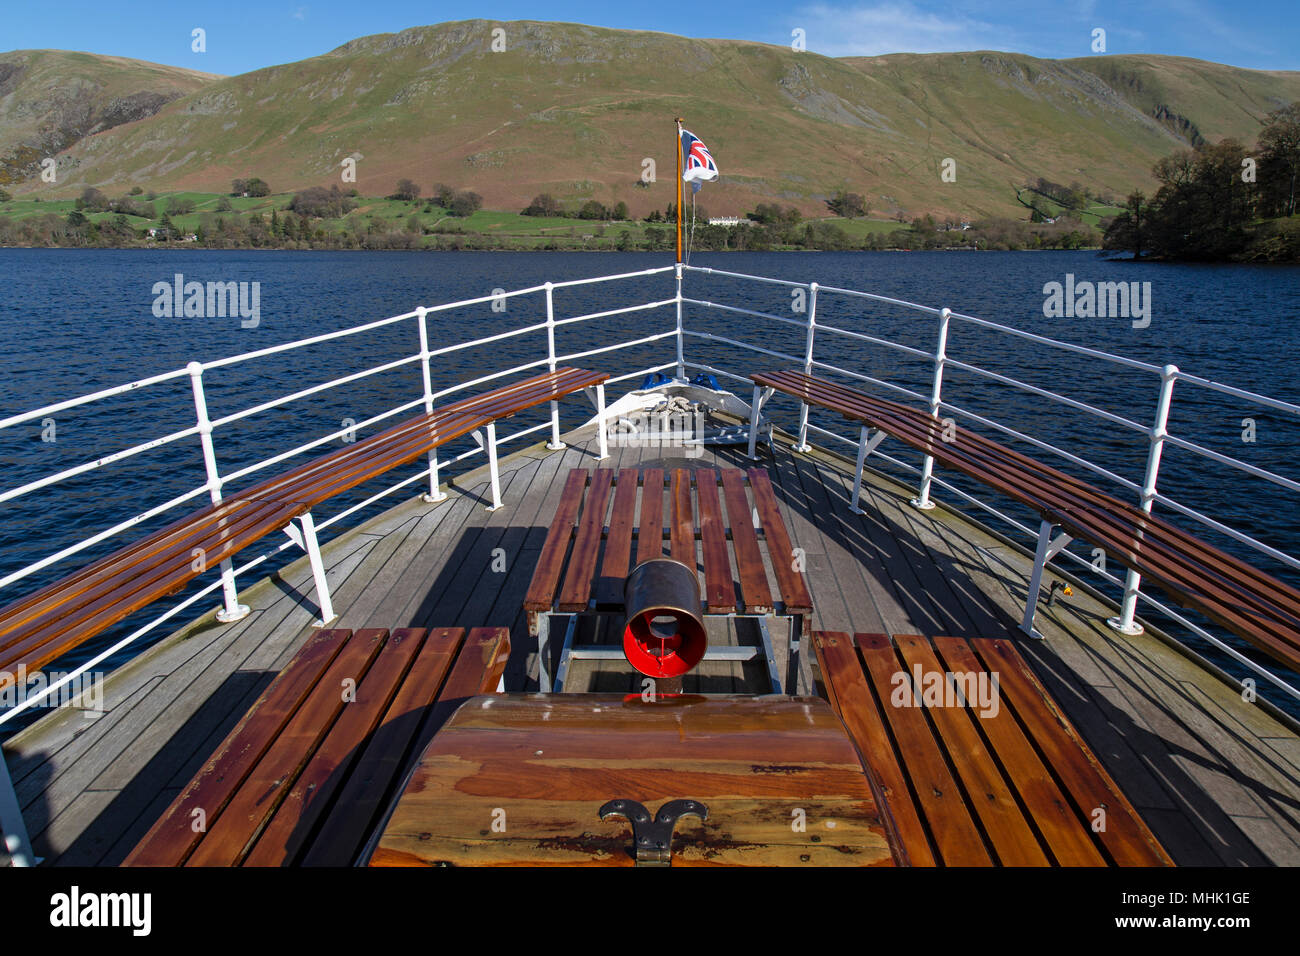 View from the front of the MV Western Belle, an Ullswater steamer in the Lake District National Park in England. Built in 1935. Stock Photo